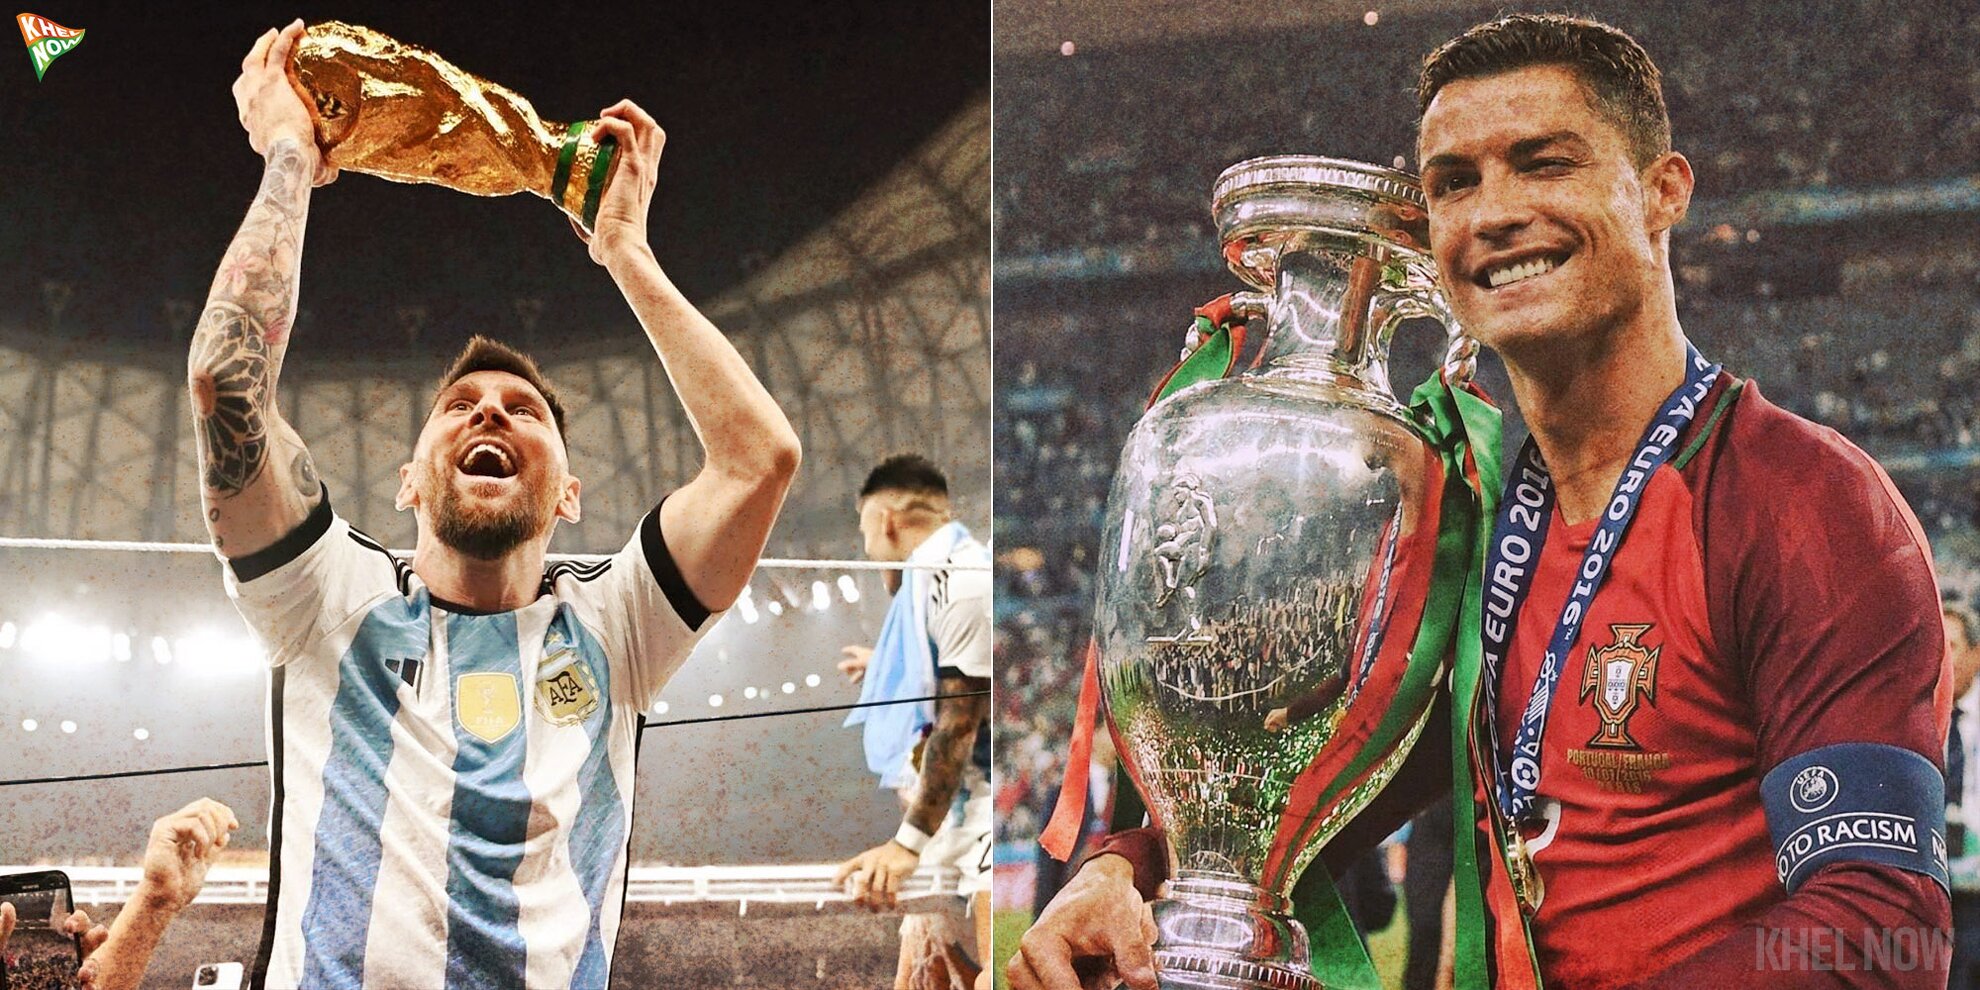 Lionel Messi vs Cristiano Ronaldo: Who has better stats in their career?